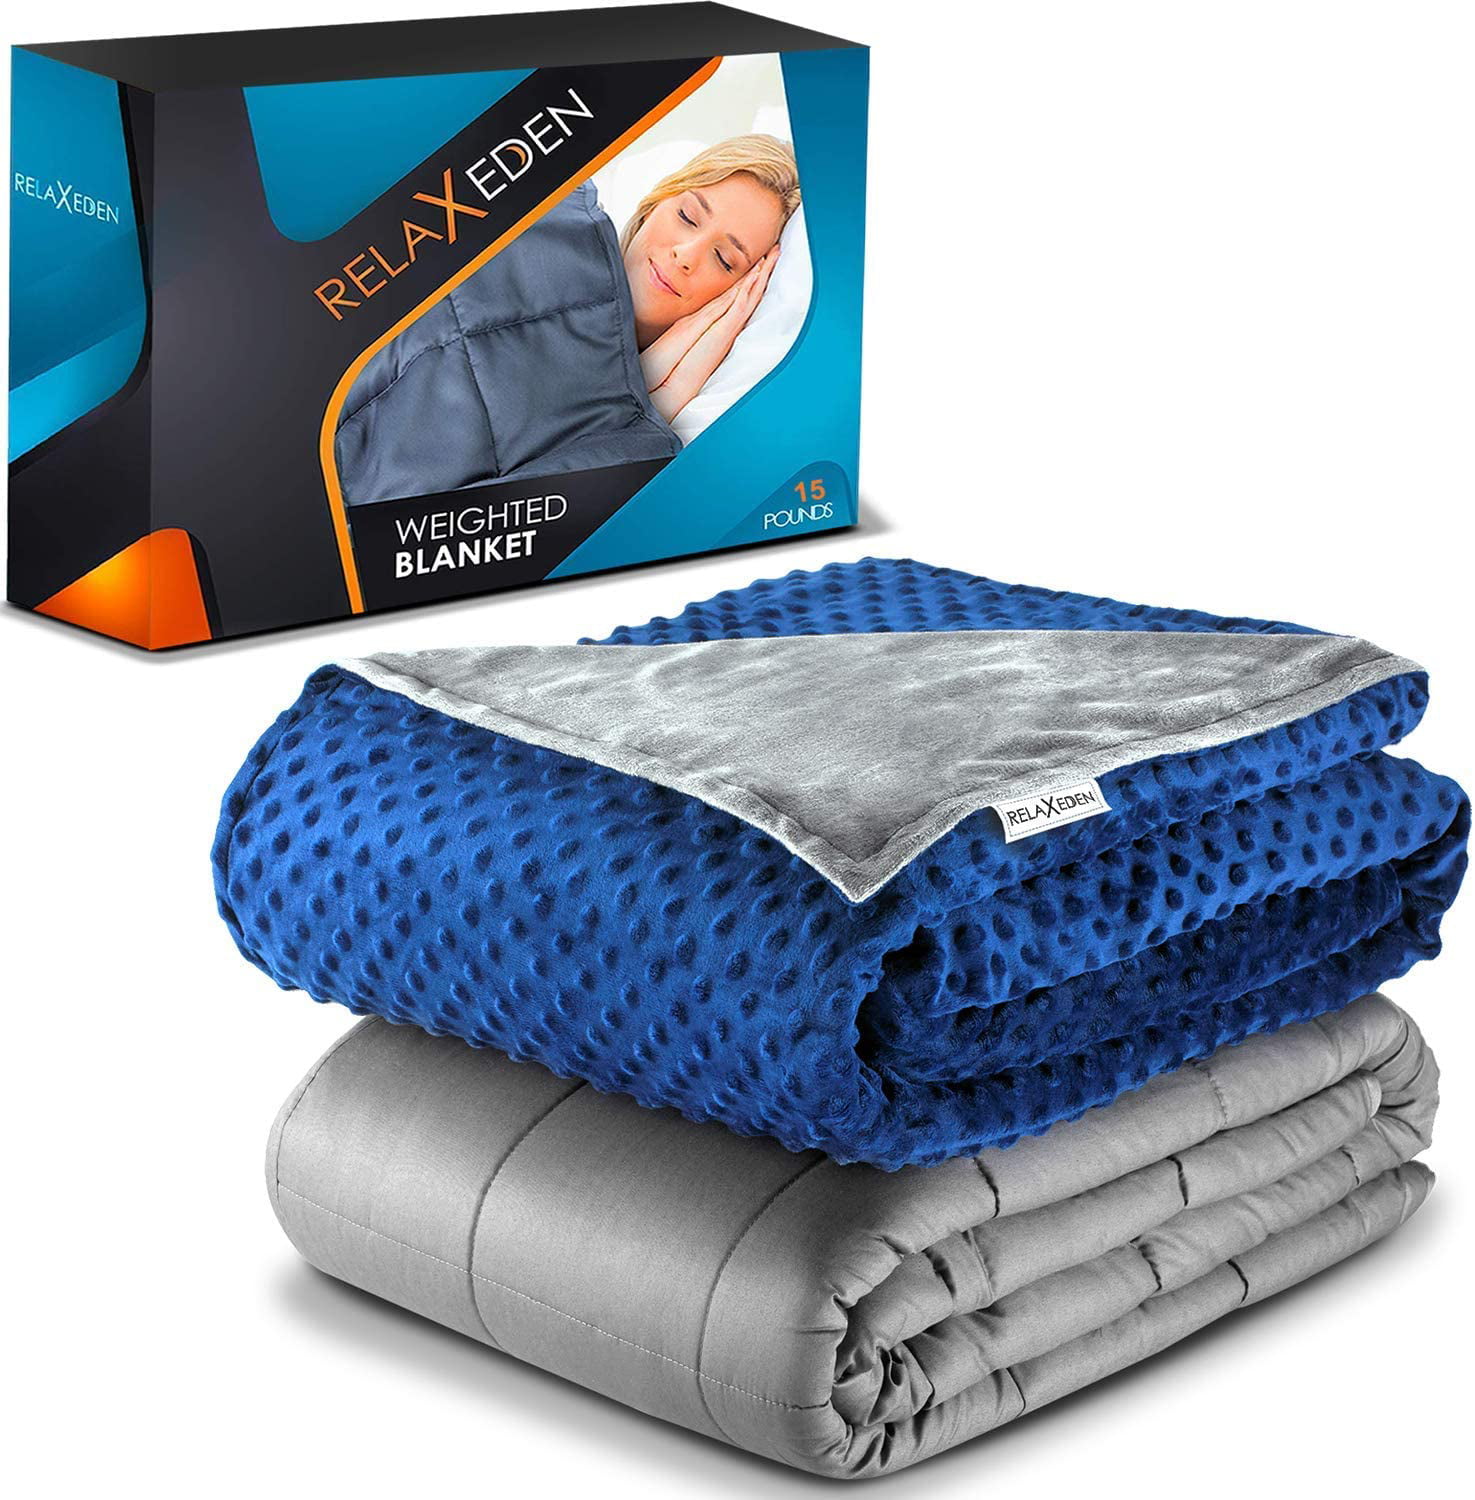 Relax Eden Weighted Blanket 15 LBS with Blue Cover - Walmart.com